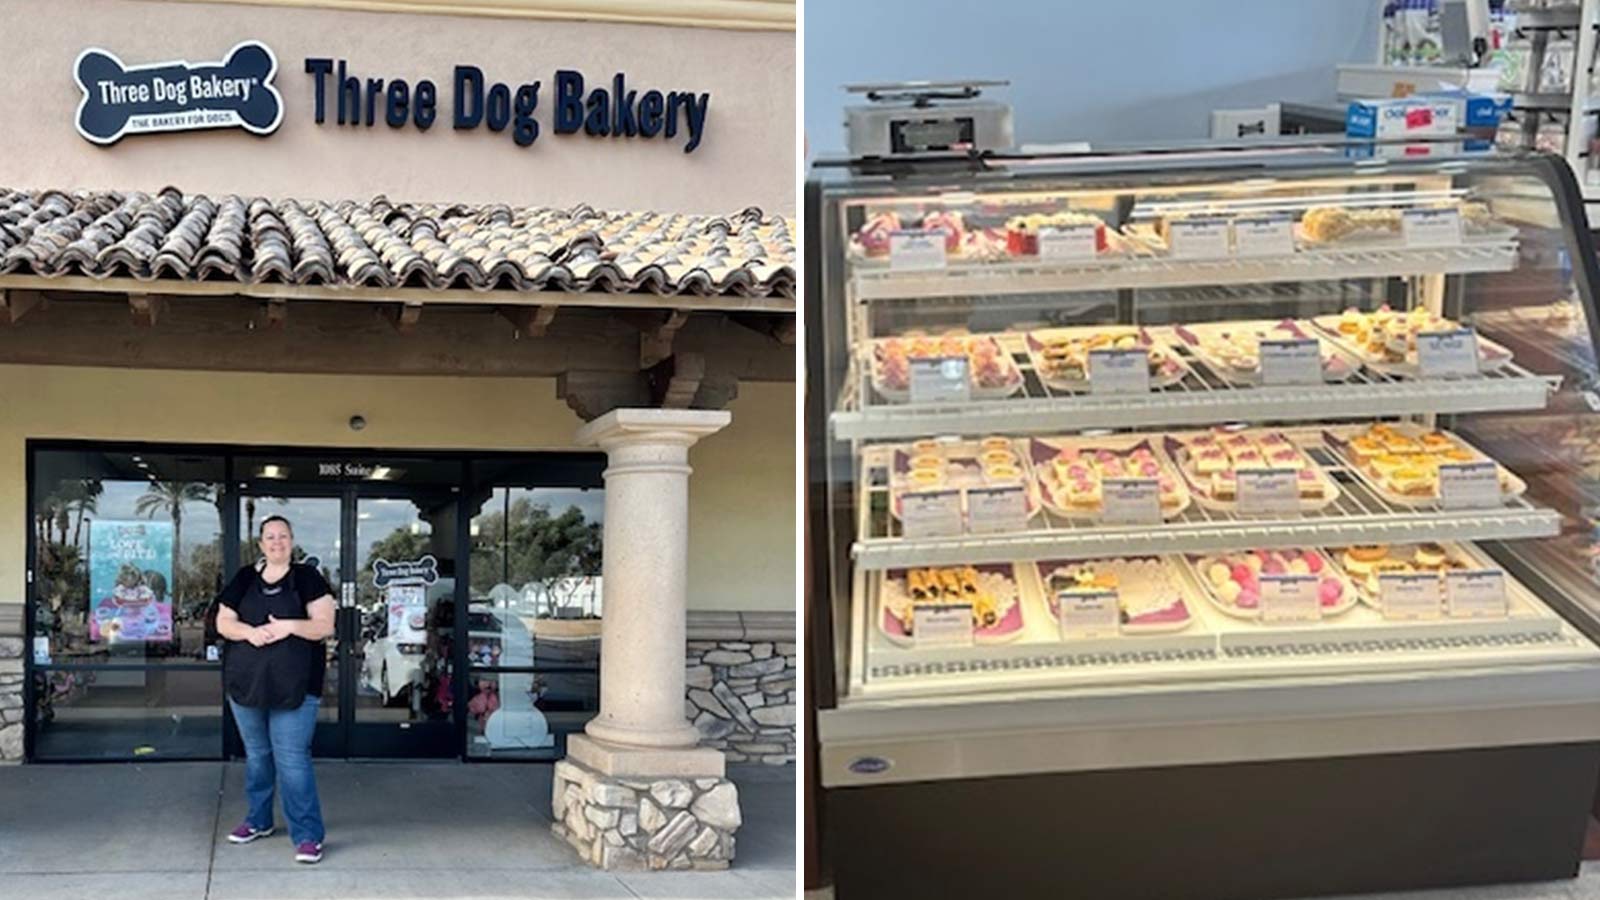 Woof, there it is: Three Dog Bakery celebrating recent opening in East Valley